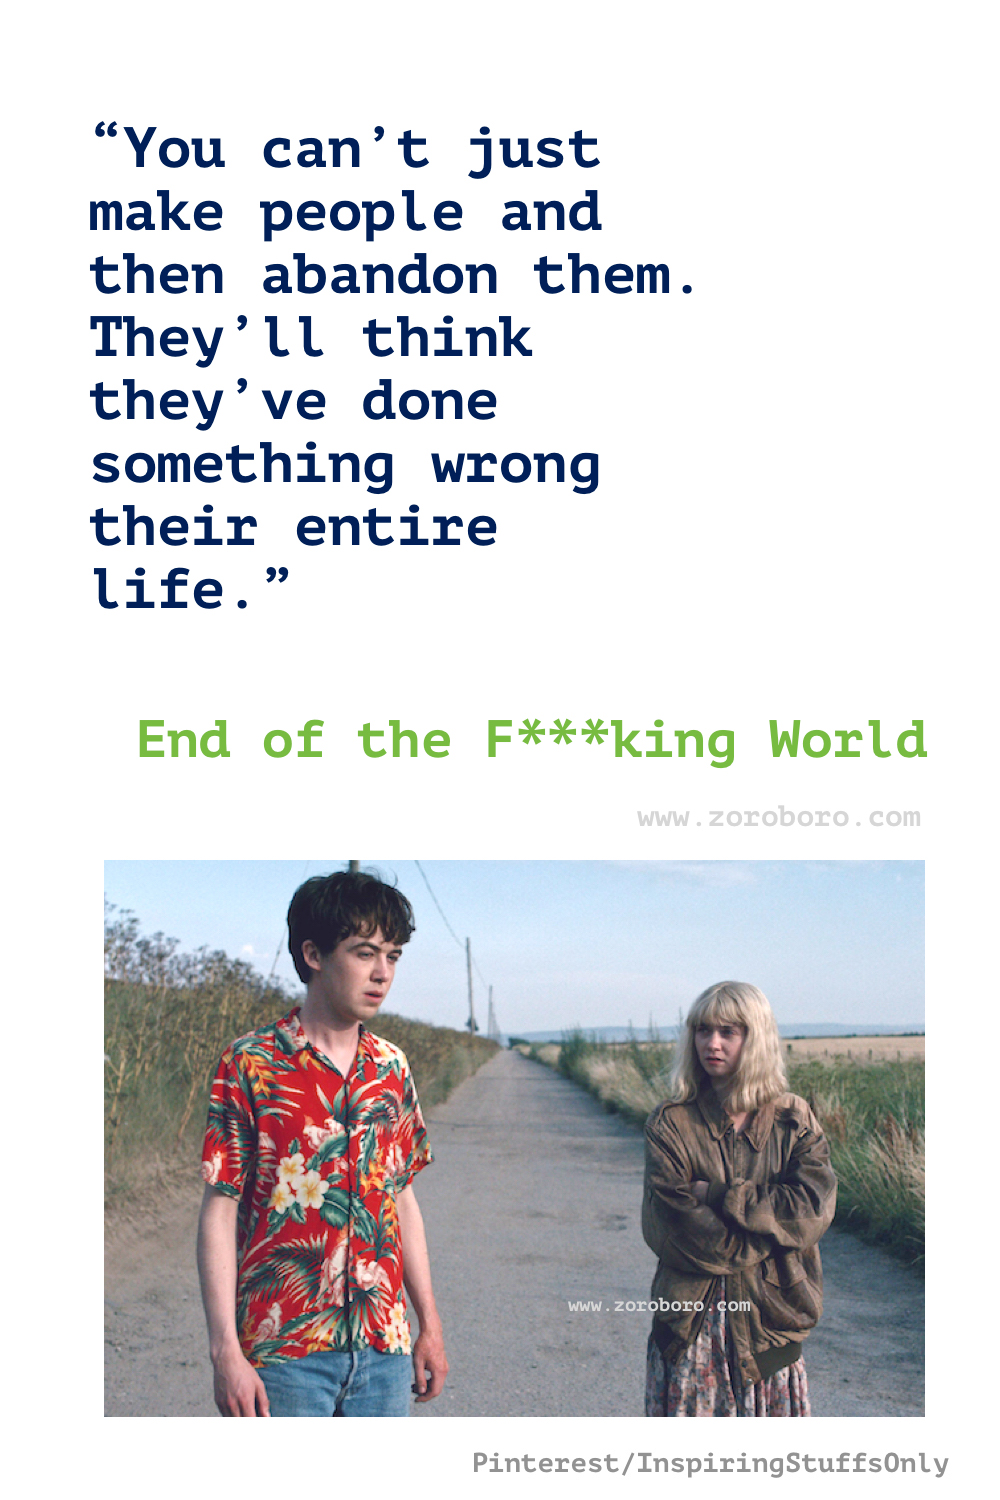 The End of the F***ing World Quotes, The End of the F***ing World T.V SHOW/SERIES Quotes. James & Alyssa Dialogues/Scenes. The End of the F***ing World Quotes.  The End of the F***ing World Season 1, 2 &3 Quotes.